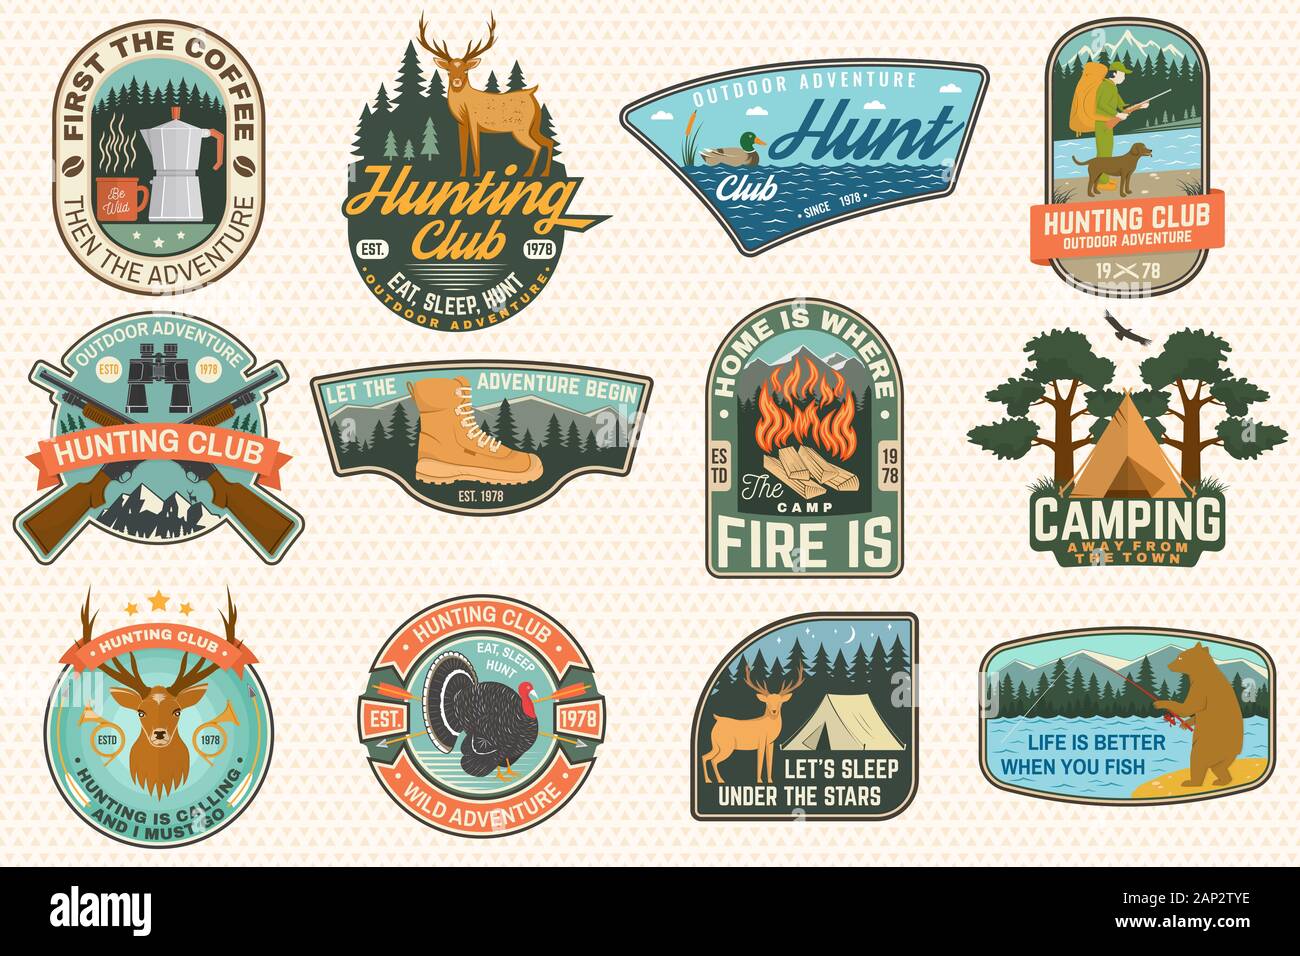 Set of outdoor adventure quotes and Hunting club patches. Vector. Concept for shirt, logo, print, stamp, patch. Patch design with hiking boots, mountains, fishing bear, deer, tent, hunter silhouette Stock Vector